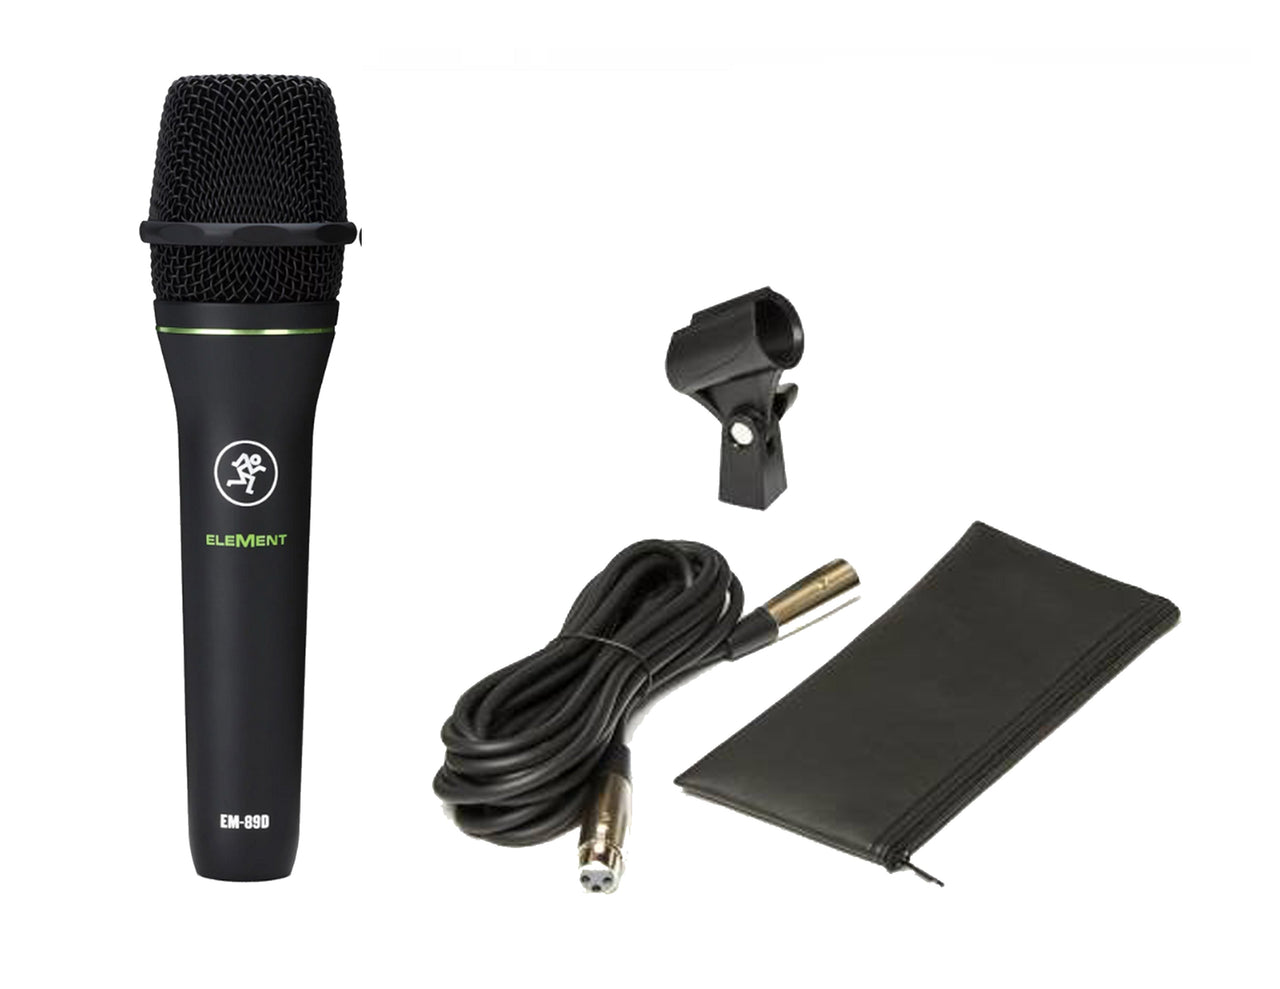 Mackie Thump GO 8" Portable Battery-Powered Loudspeaker+Speaker Stand+Thump Go Carry Bag+Get Free Mackie Microphone EM89D